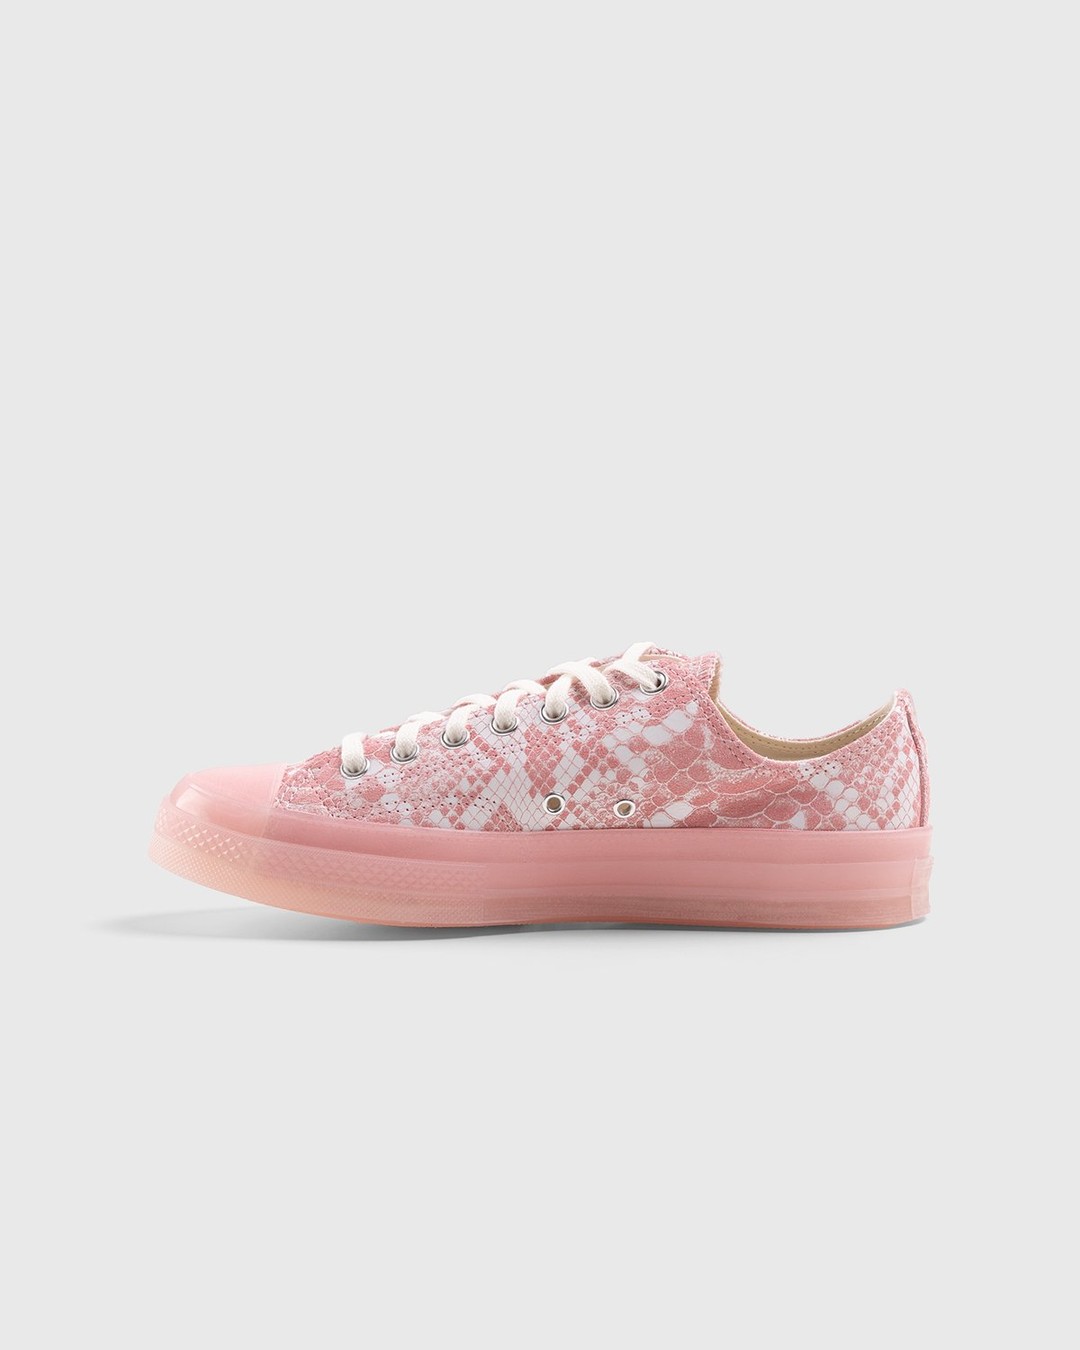 Converse x GOLF WANG – Chuck 70 Ox Python Pink Dogwood Vintage White - Low Top Sneakers - Pink - Image 2